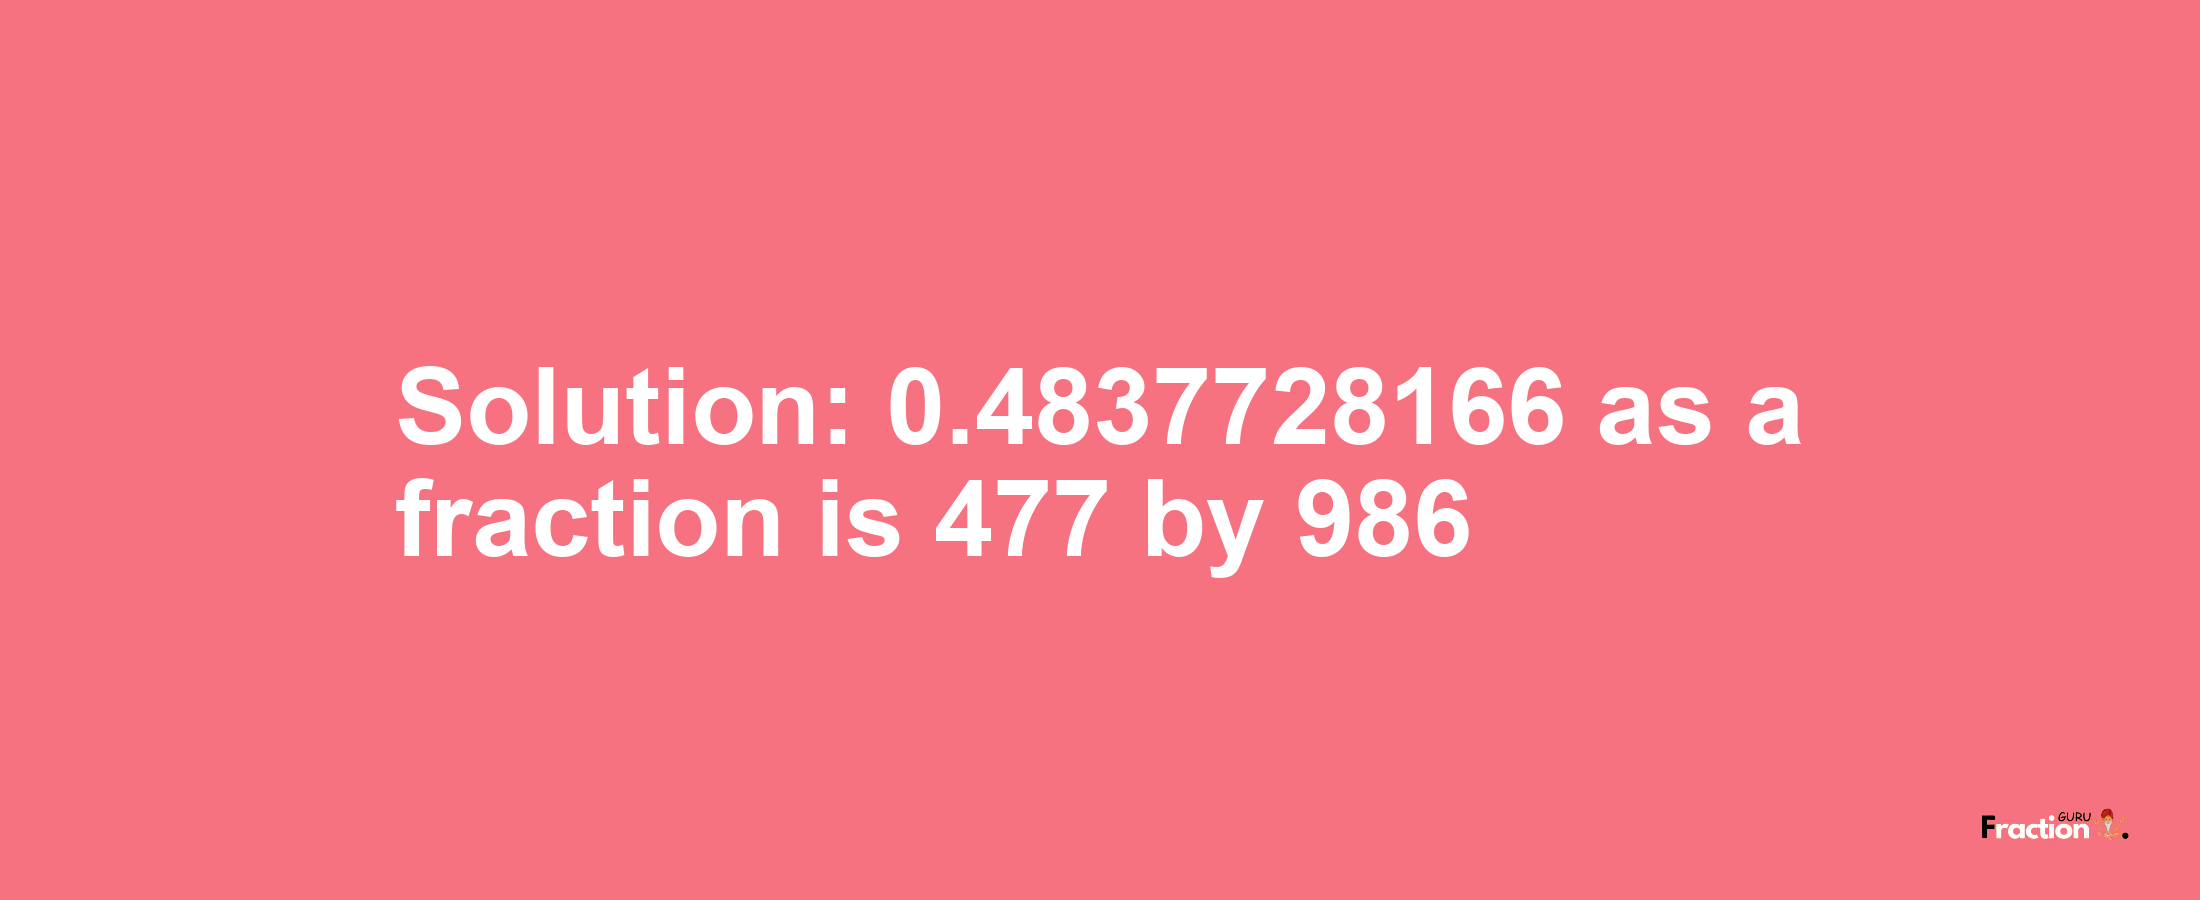 Solution:0.4837728166 as a fraction is 477/986